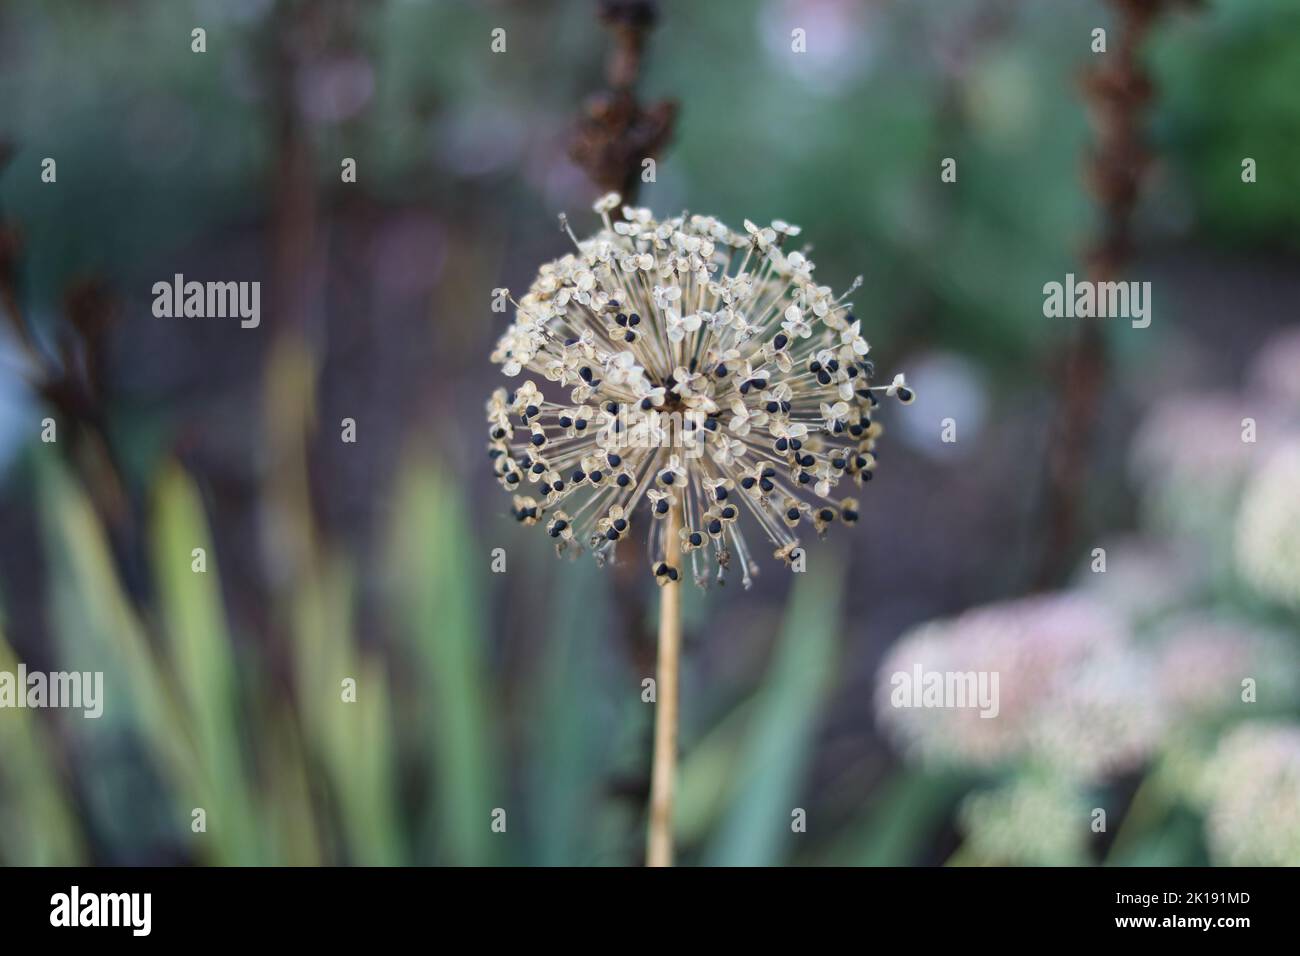 Autumn image of allium at the end of the flowering season with seeds visible Stock Photo